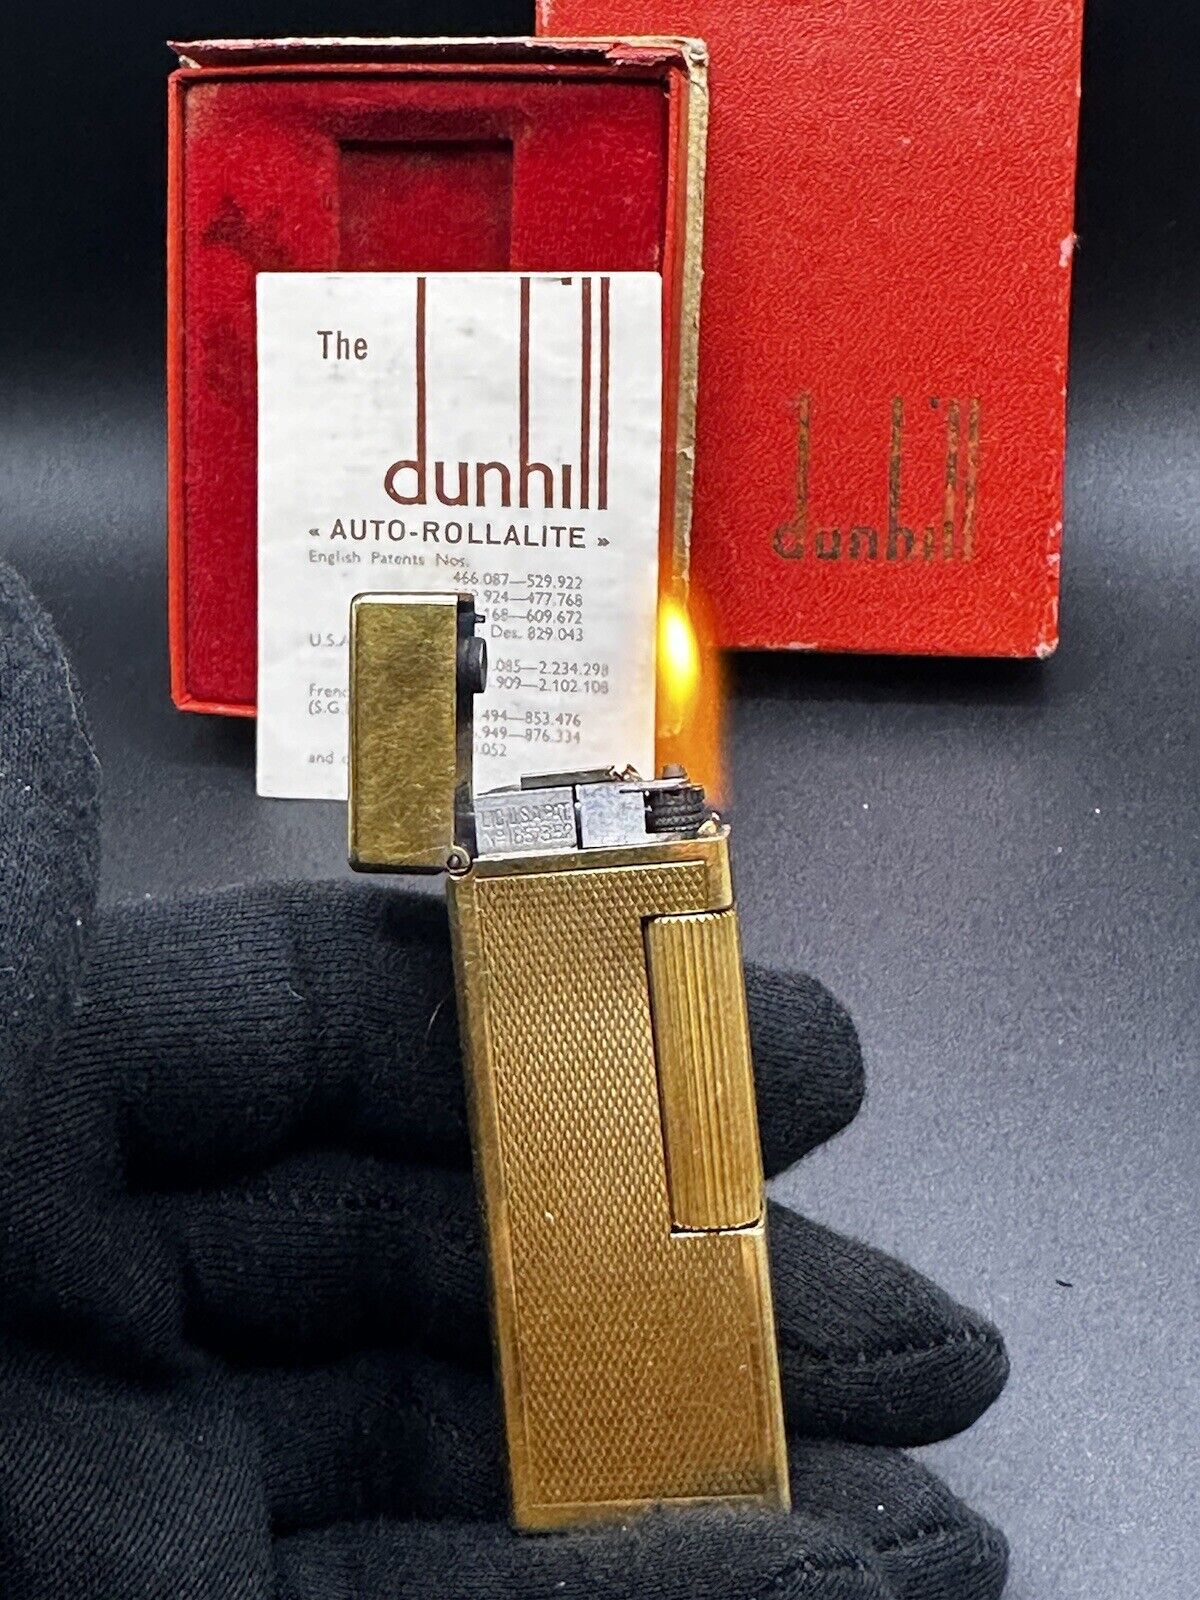 Rare Dunhill Auto Rollalite Lighter With Box